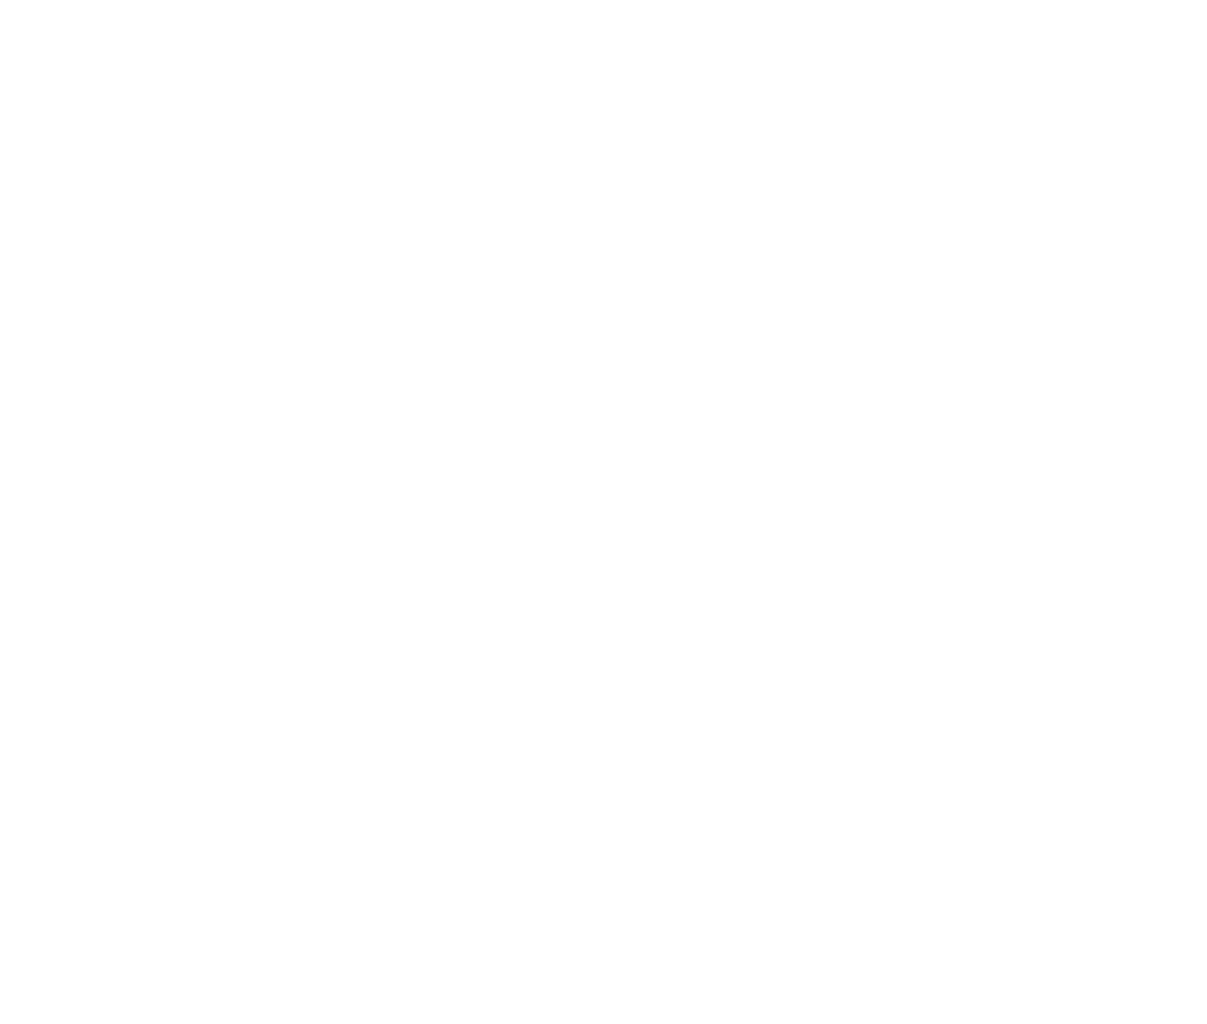 pngkey.com-united-nations-logo-png-1391666.png